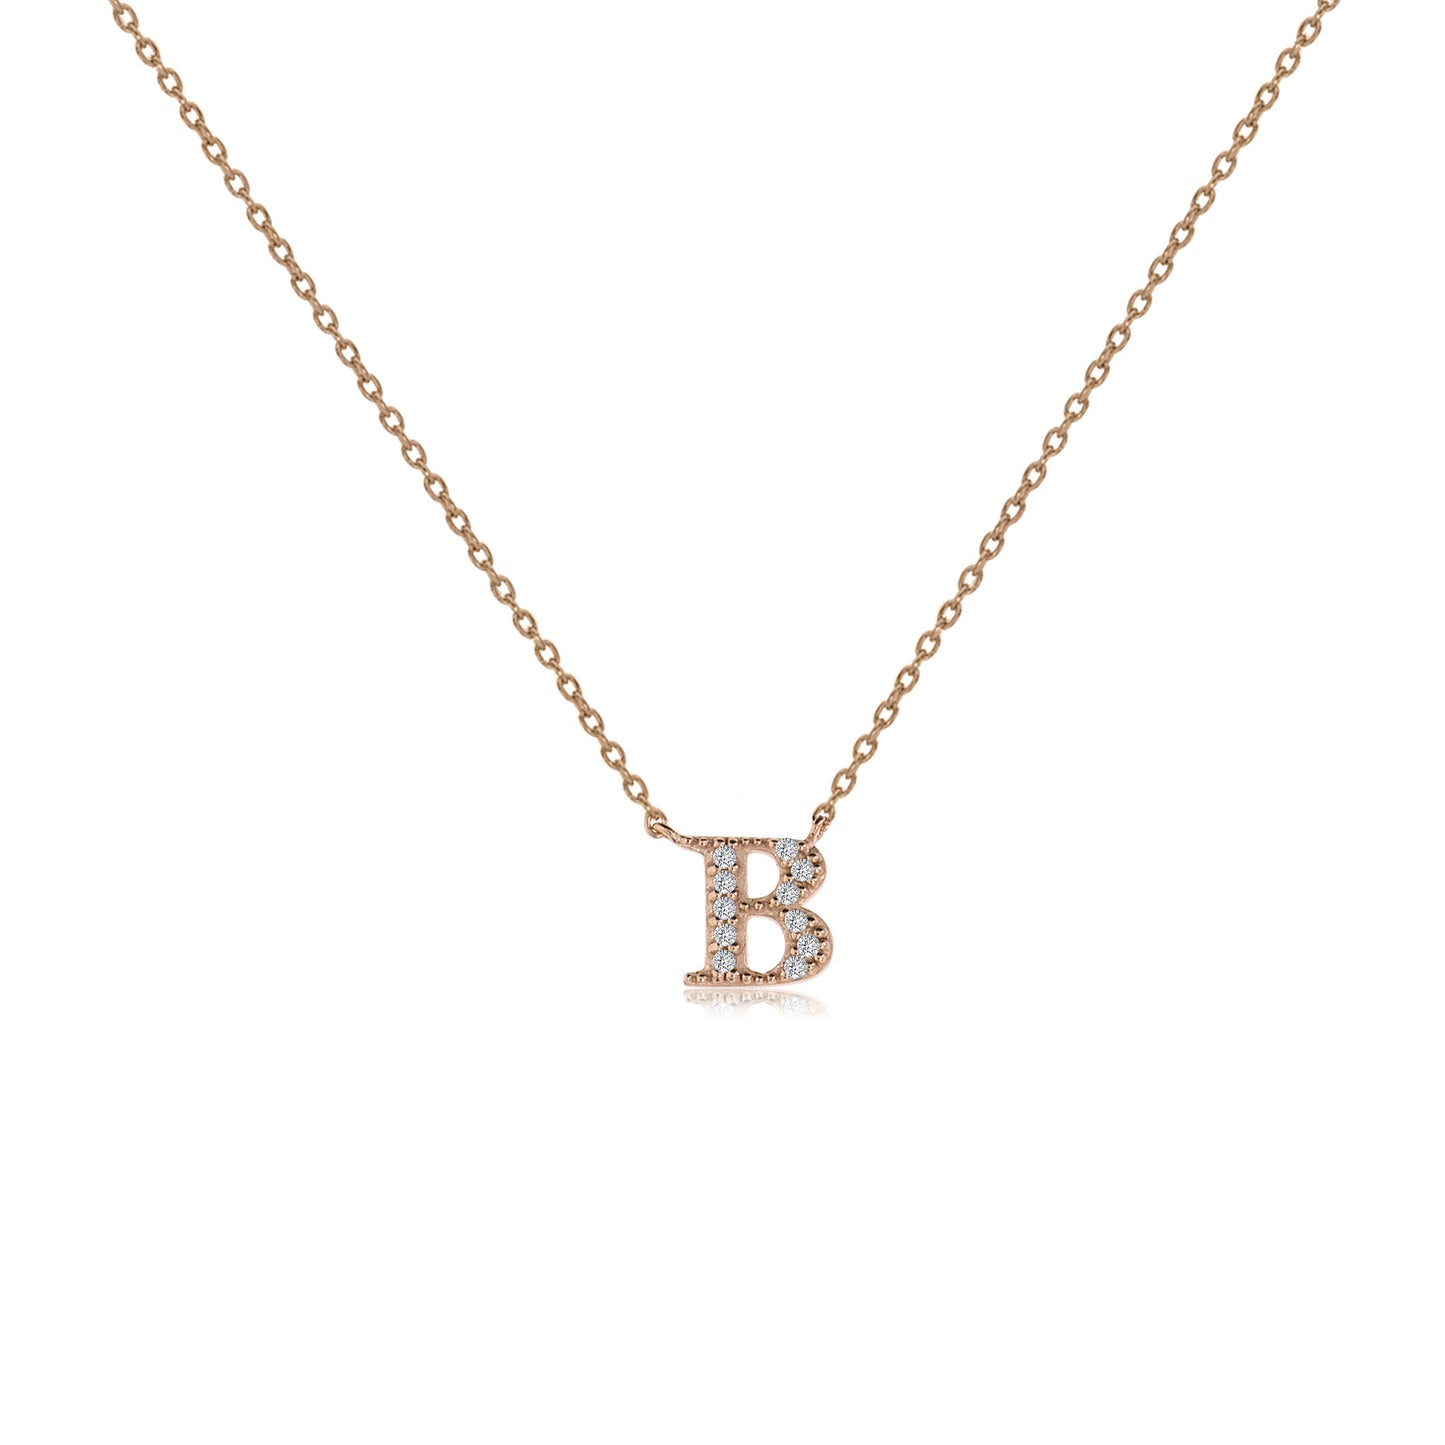 NT-26/R/B - Initial "B" Necklace with Sliding Length Adjuster